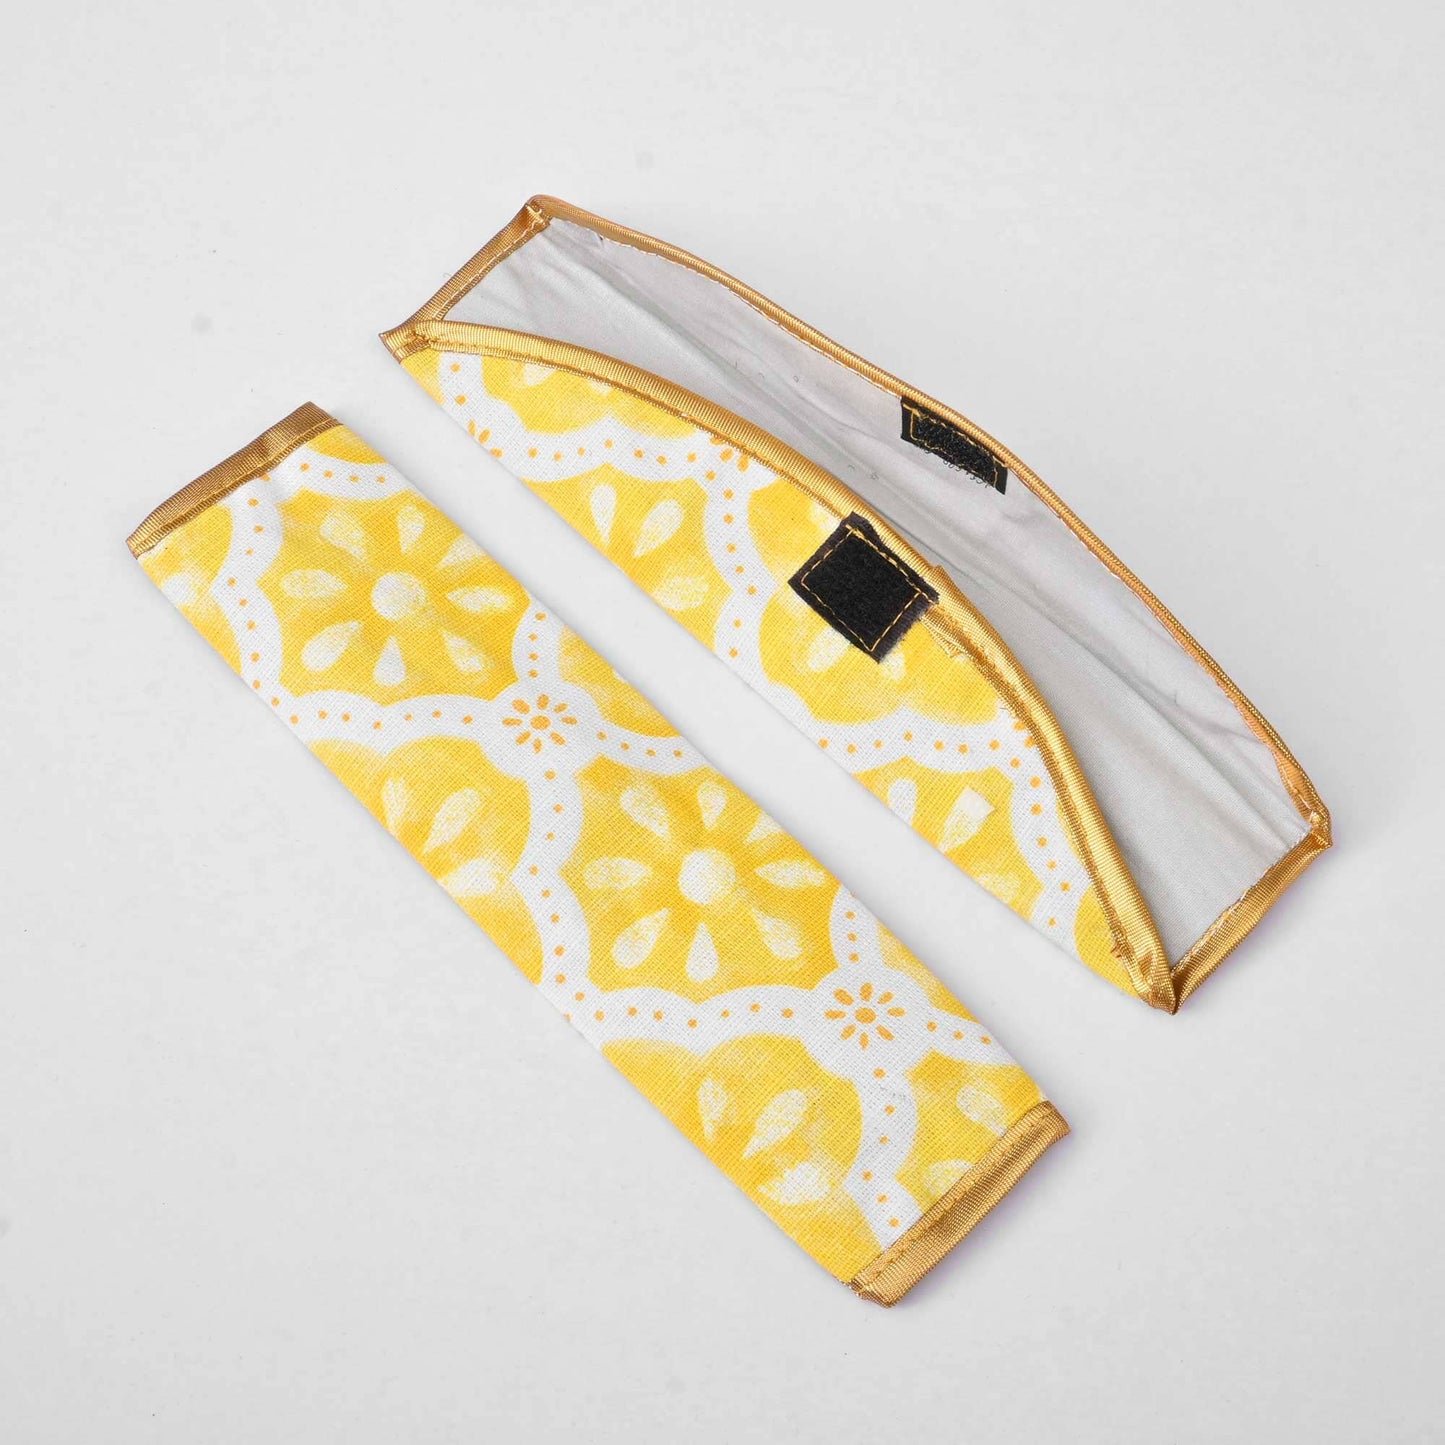 Fridge Handle Covers Filling Quilted Fabric Home Decor De Artistic White & Yellow 